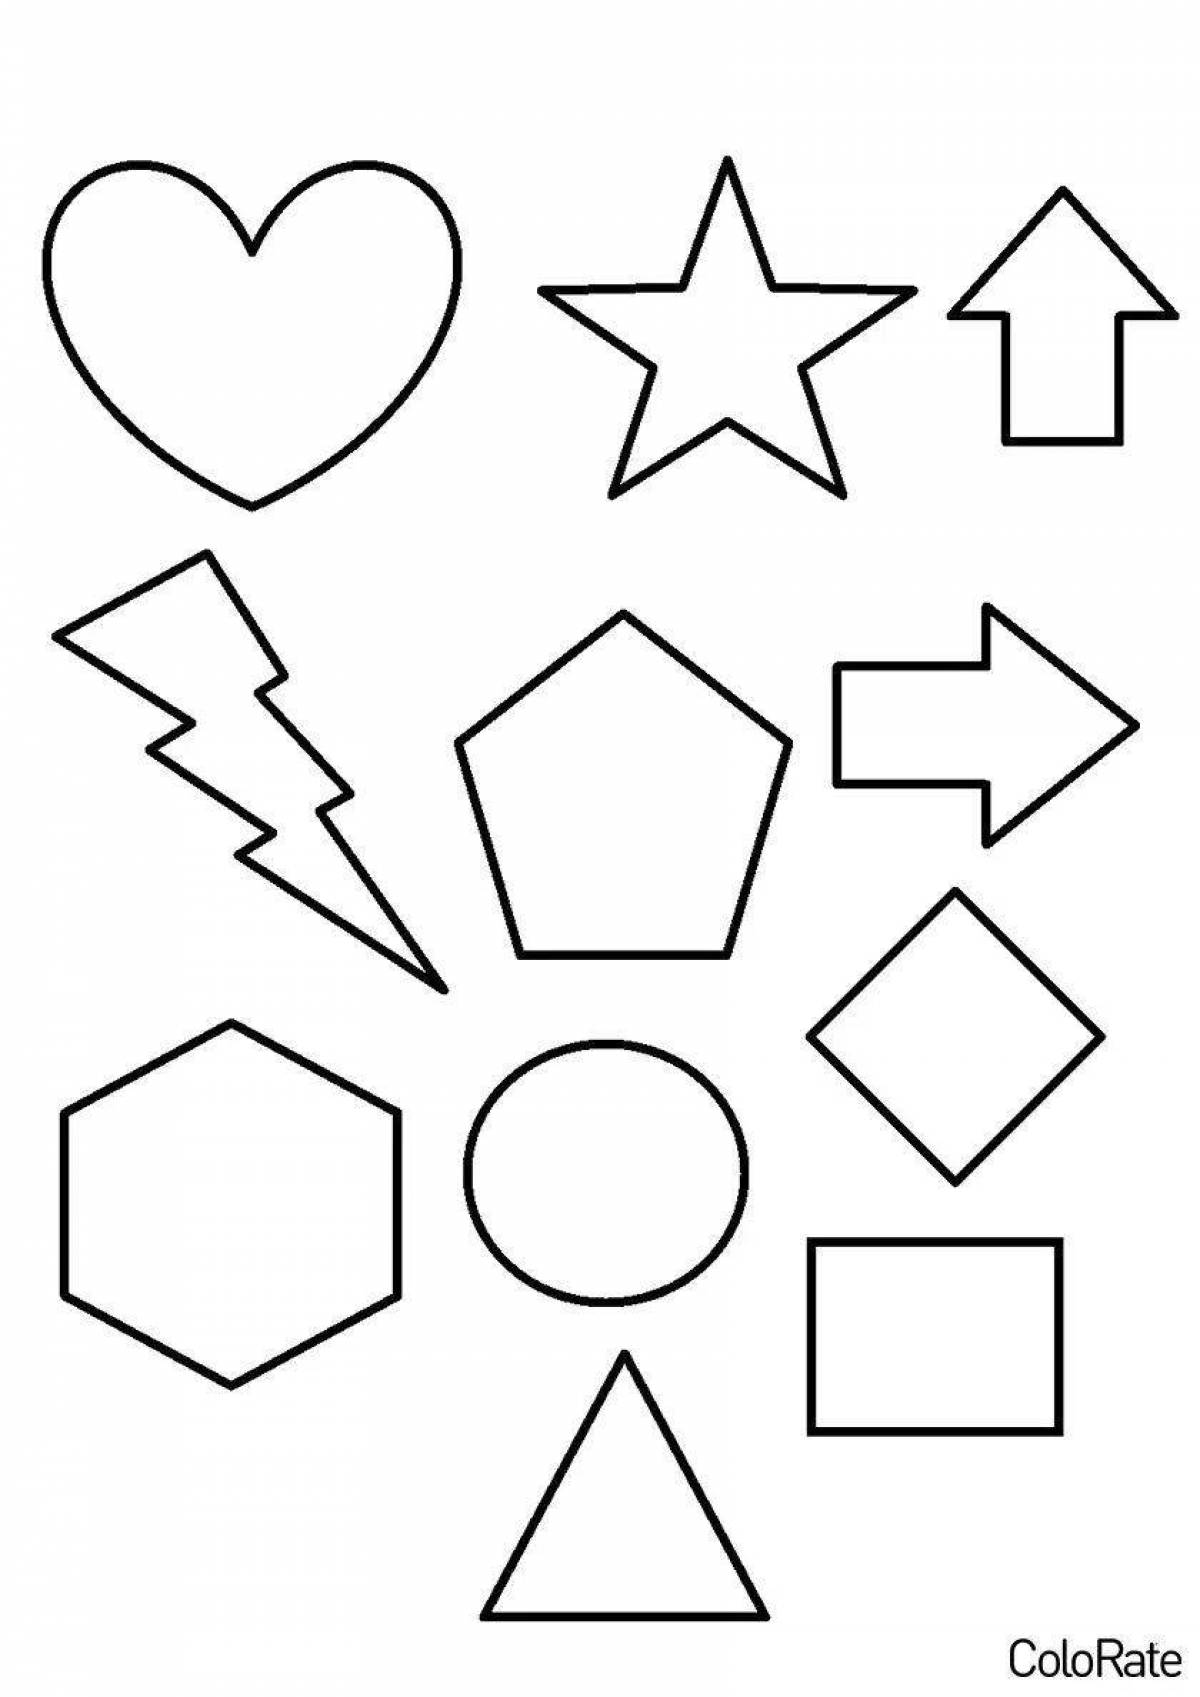 Coloring page for complex geometric shapes